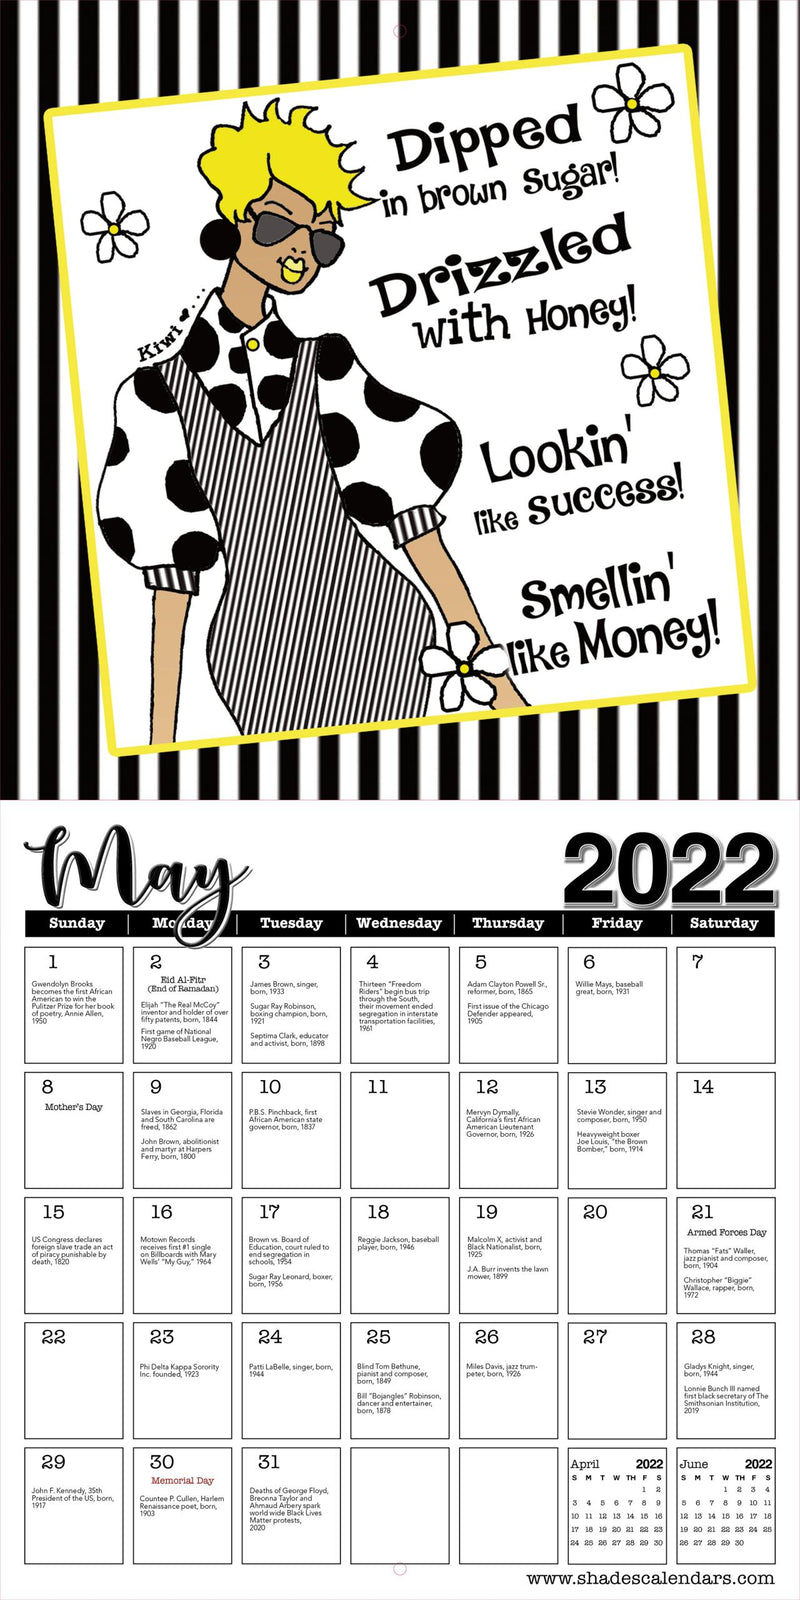 2022 Be Your Own InspHERation  Calendar - Kiwi Mcdowell - Luv That Art 